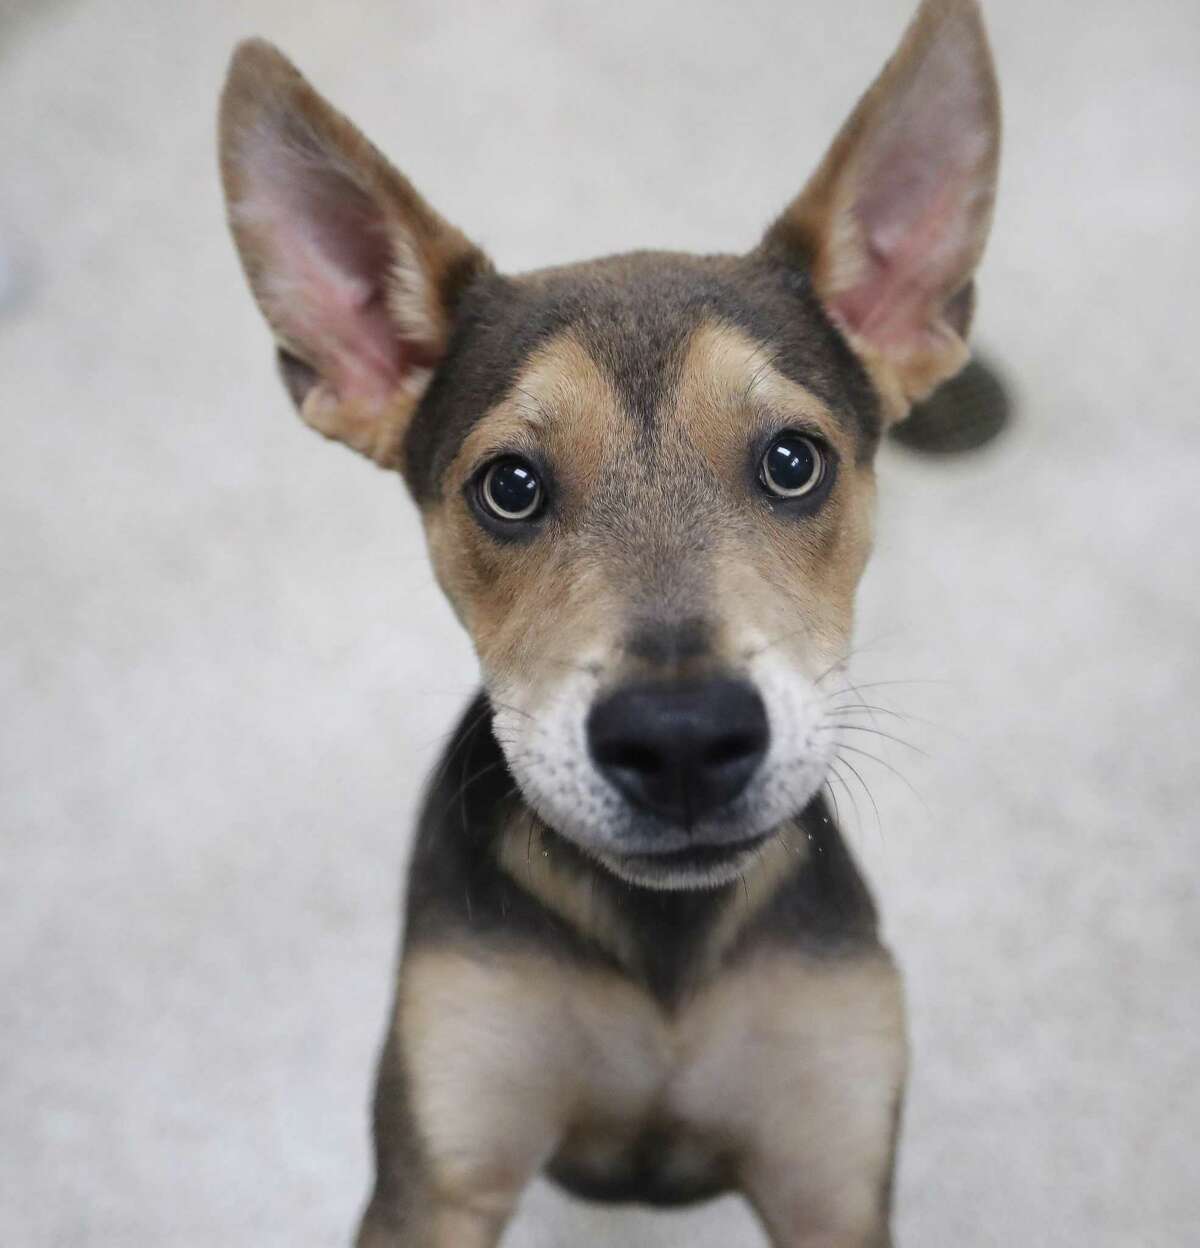 Jinx, a Shepherd mix is up for adoption with her siblings at the Houston Humane Society, Wednesday, August 11, 2021, in Houston. Many Houston-area shelters are inundated with intakes due to COVID, evictions and abandoned animals.